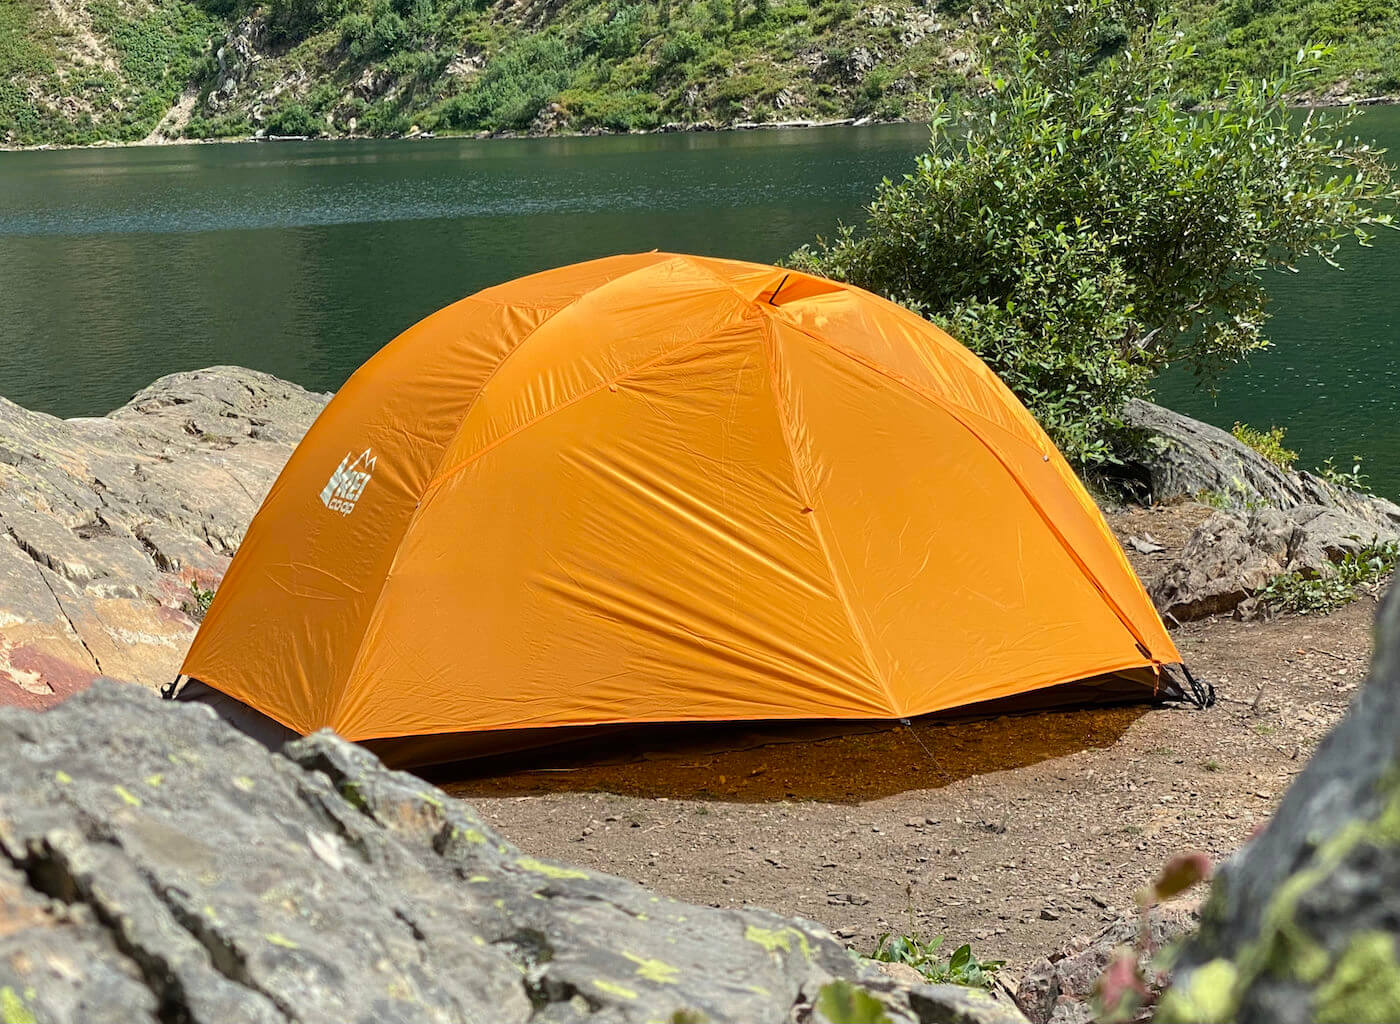 This backpacking tent review photo shows the REI Co-op Half Dome SL 2+ Tent setup near a mountain lake during the testing and review process.